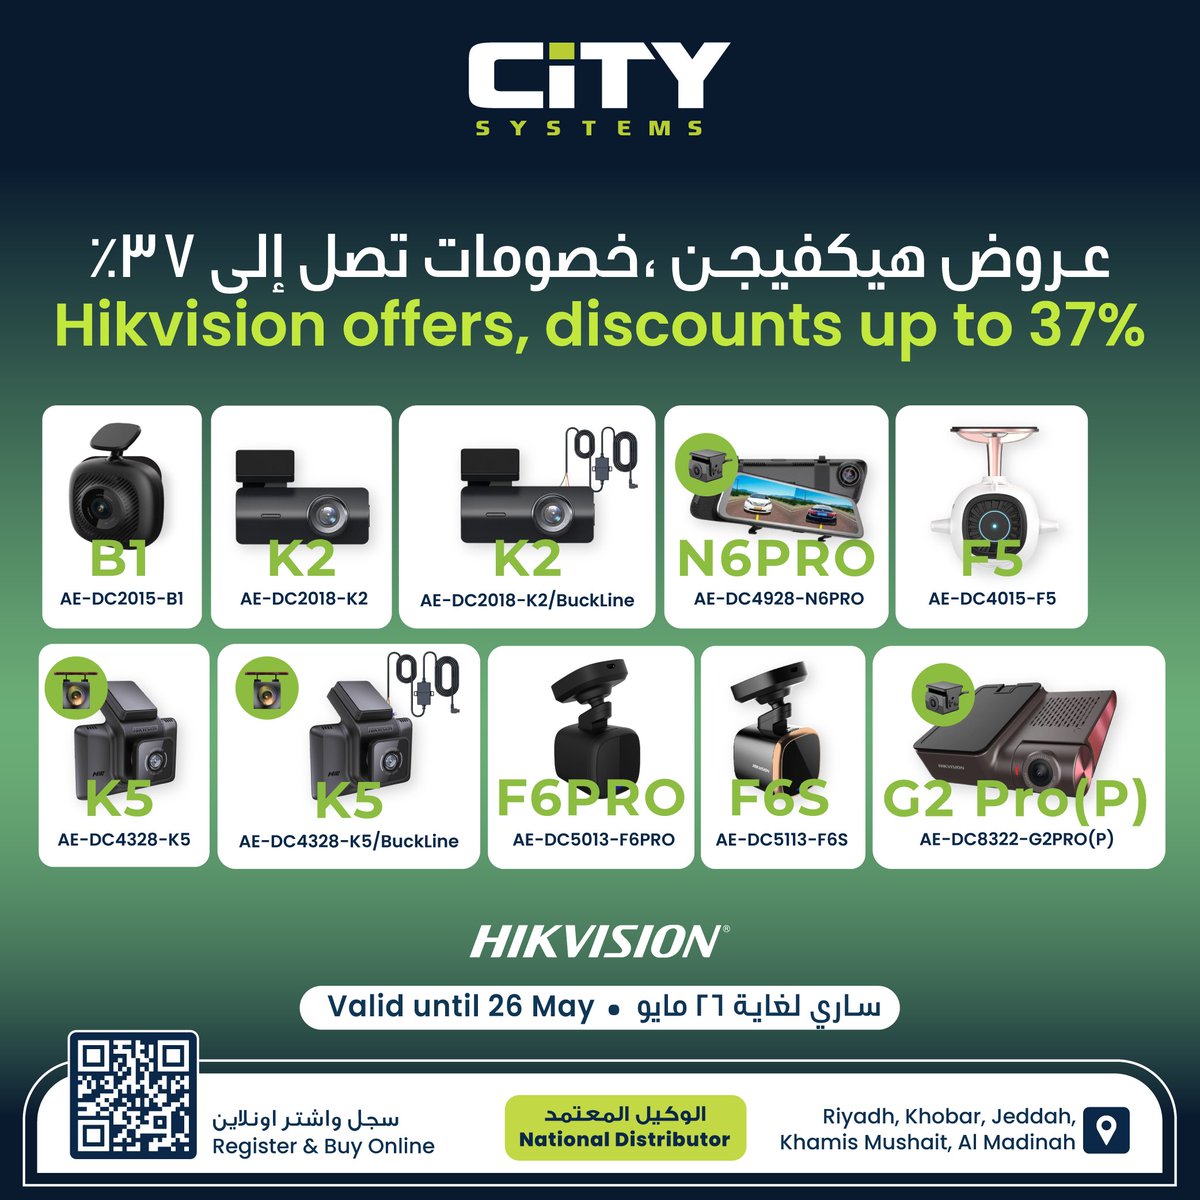 Enjoy discounts of up to 37% on Hikvision dash cams during this month.This special promotion is valid until 26th May 2024. Don't miss out on these incredible deals!

Hurry and take advantage of these discounts before the offer expires! Drive safe with our top-notch dash cams.